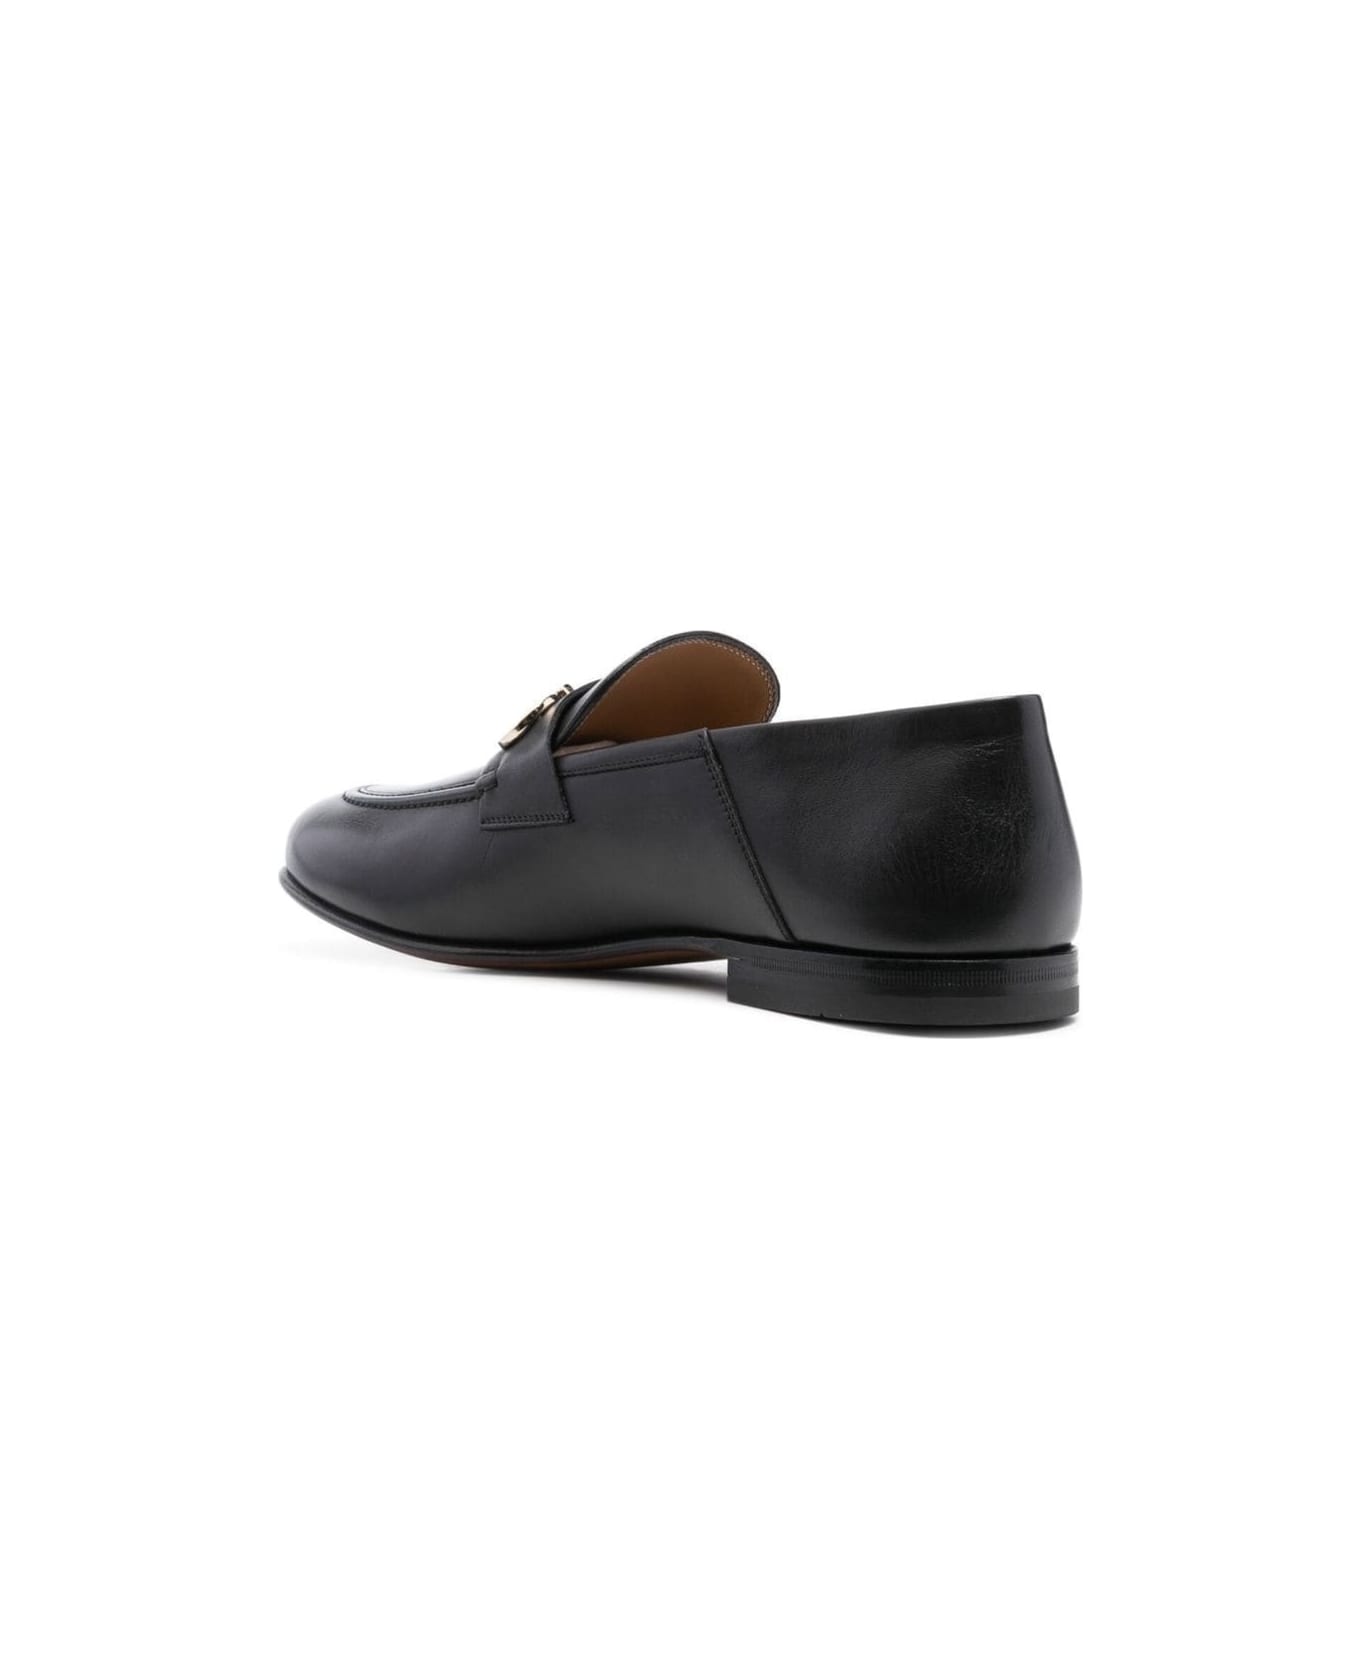 Ferragamo Black Gin Loafers With Metal Logo Placque At The Front In Calf Leather Man - Black